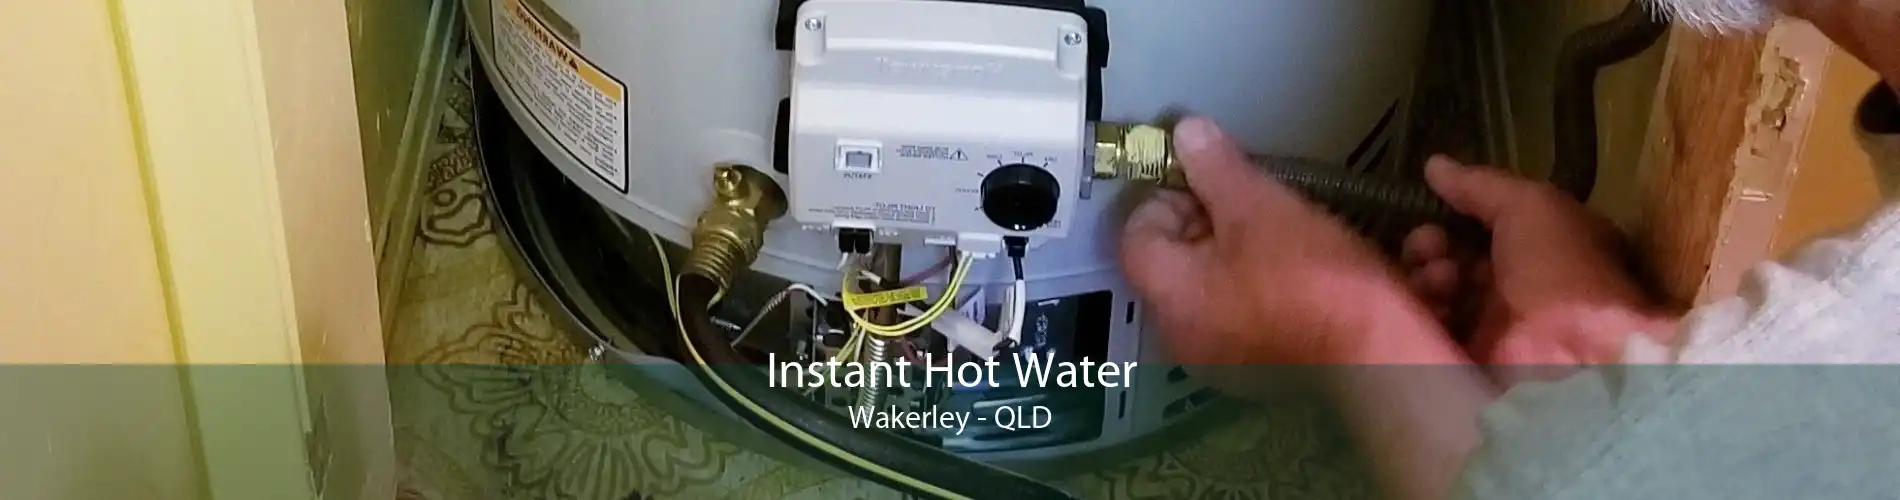 Instant Hot Water Wakerley - QLD